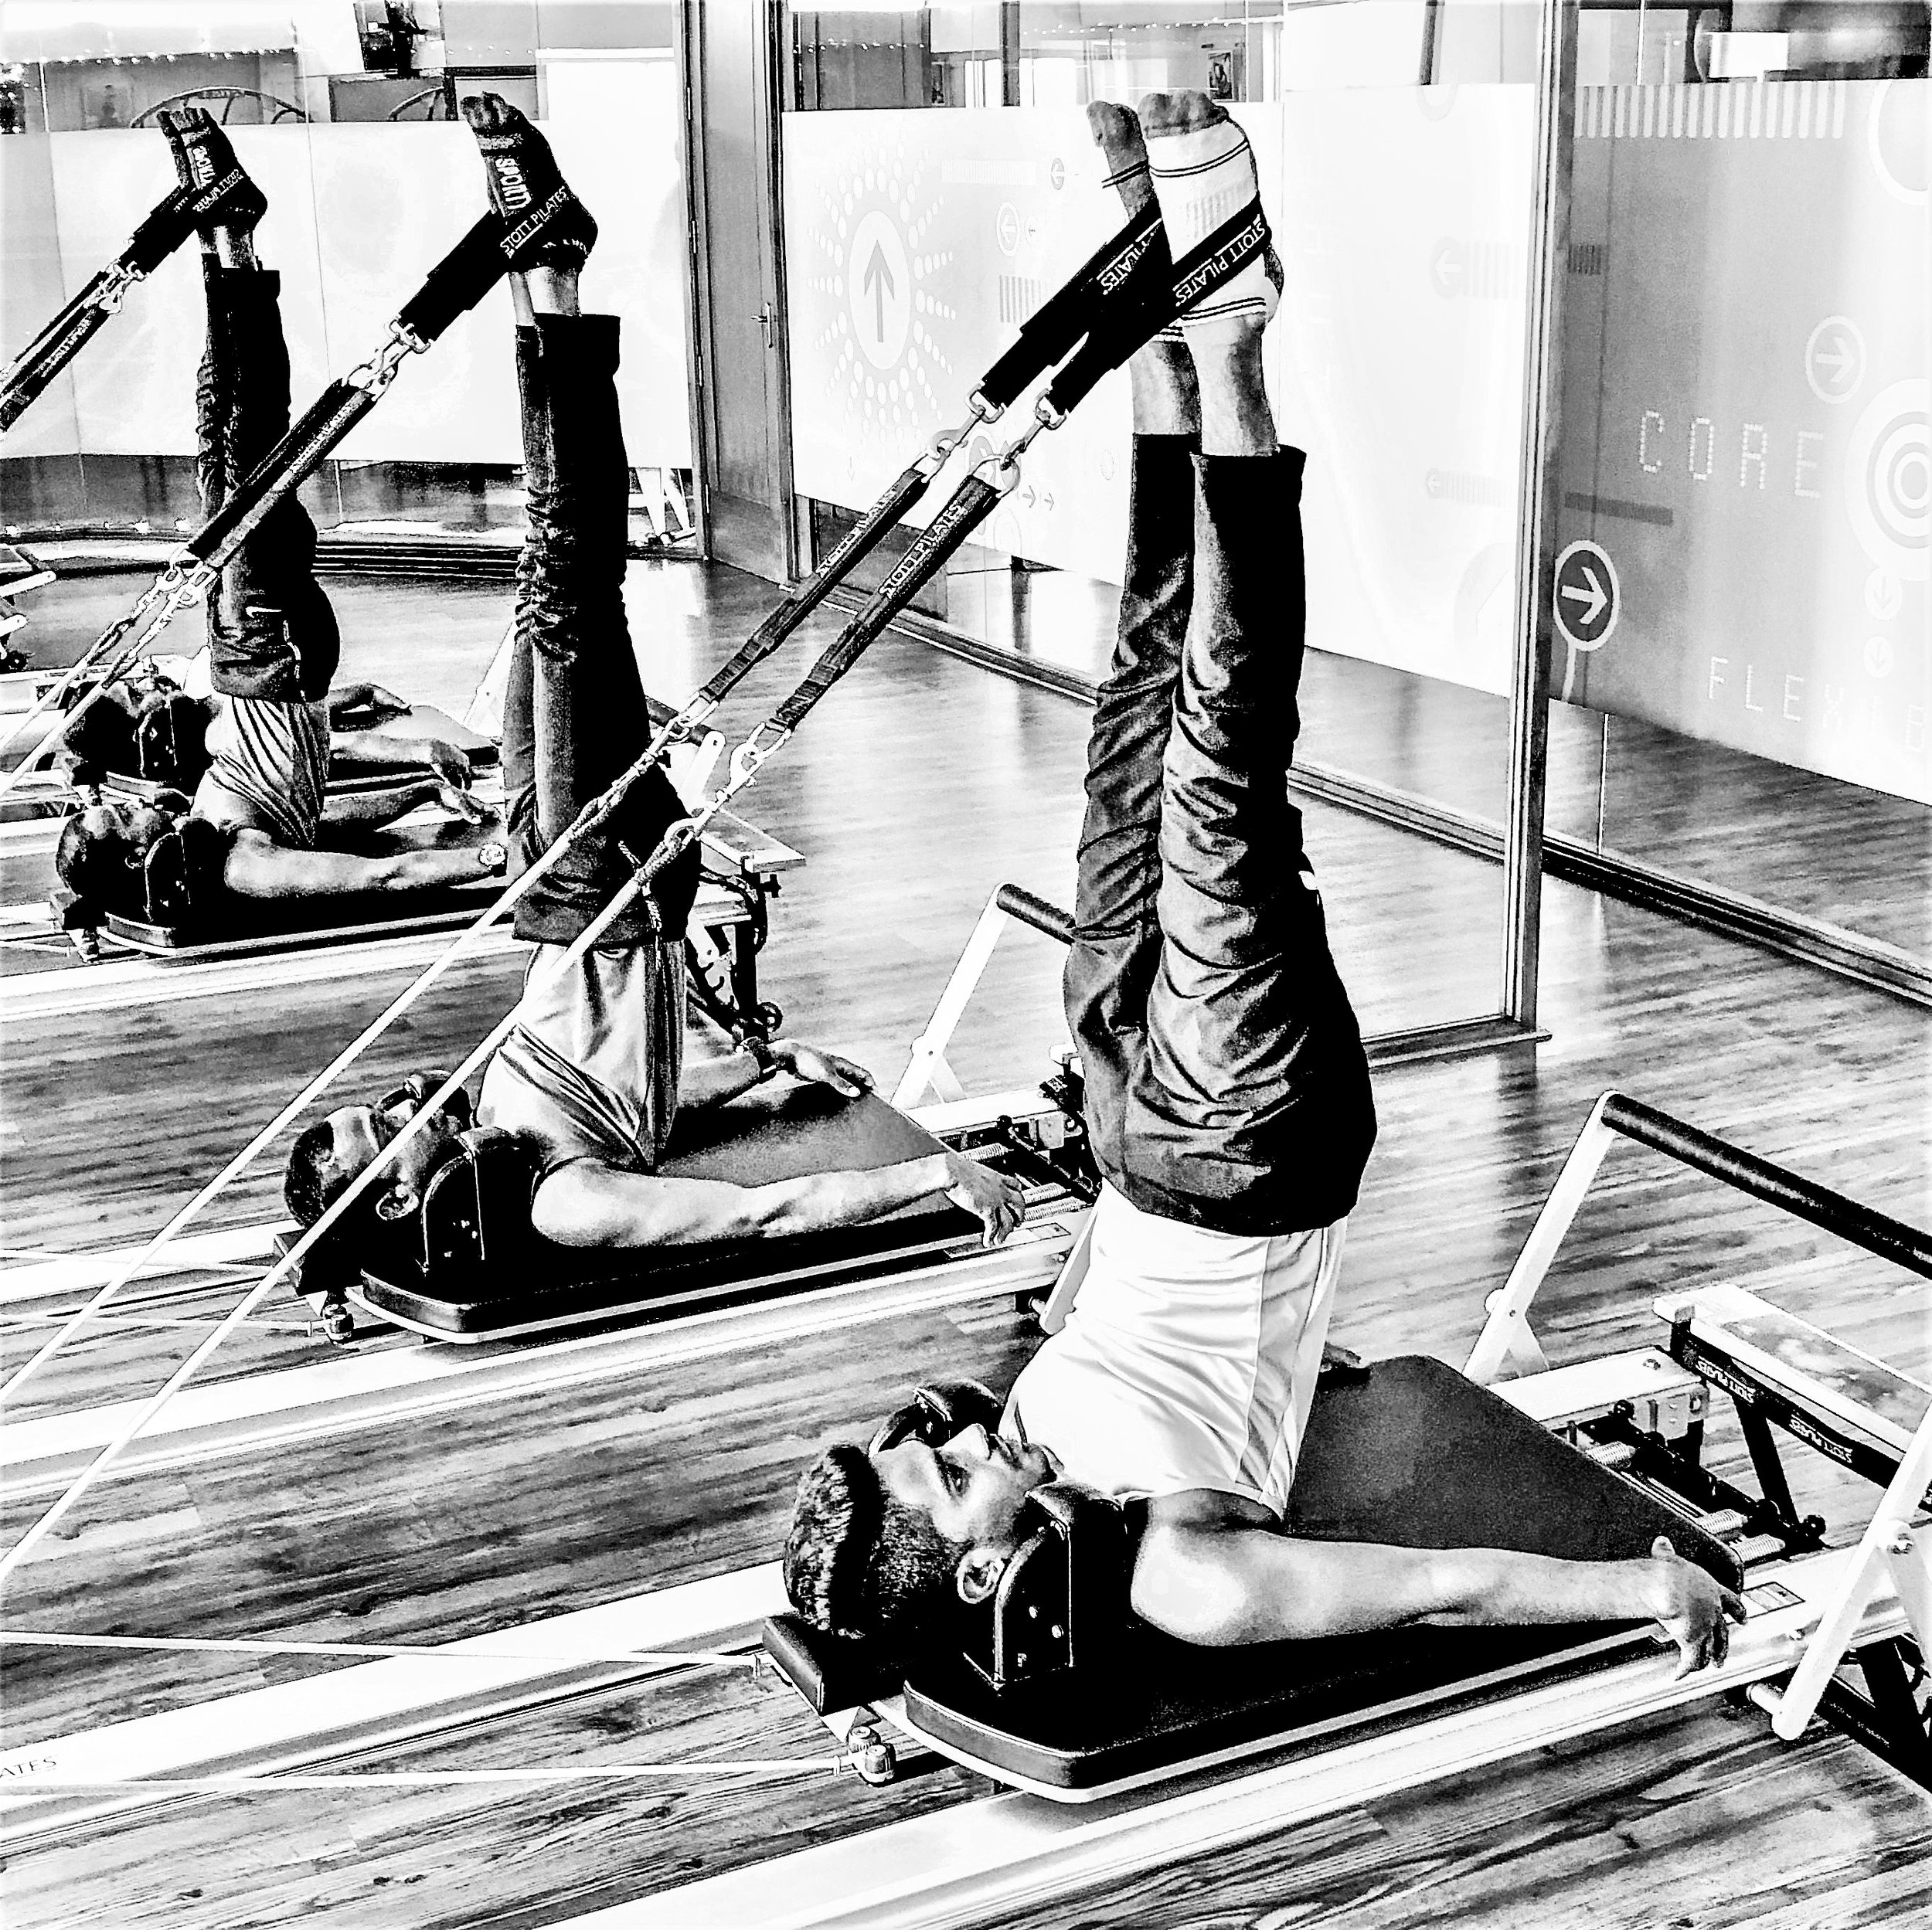 Reformer Pilates workouts at The Zone Mind and Body Studio